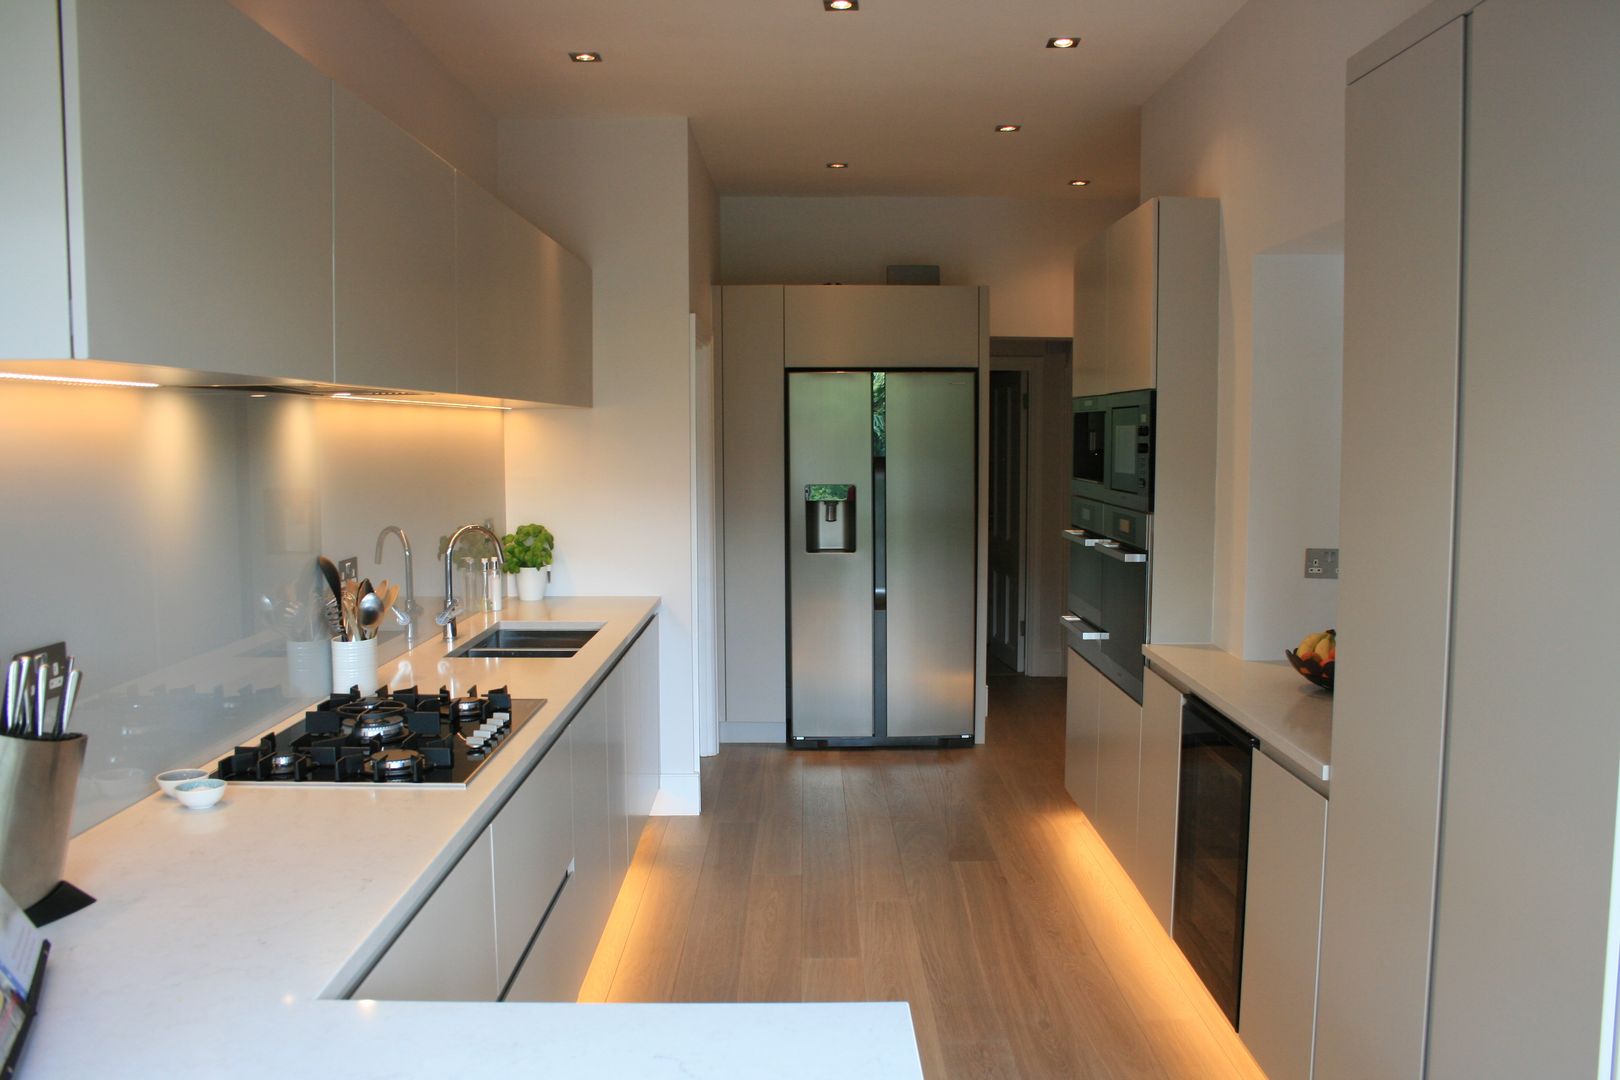 Barnes Kitchen , Place Design Kitchens and Interiors Place Design Kitchens and Interiors Kitchen